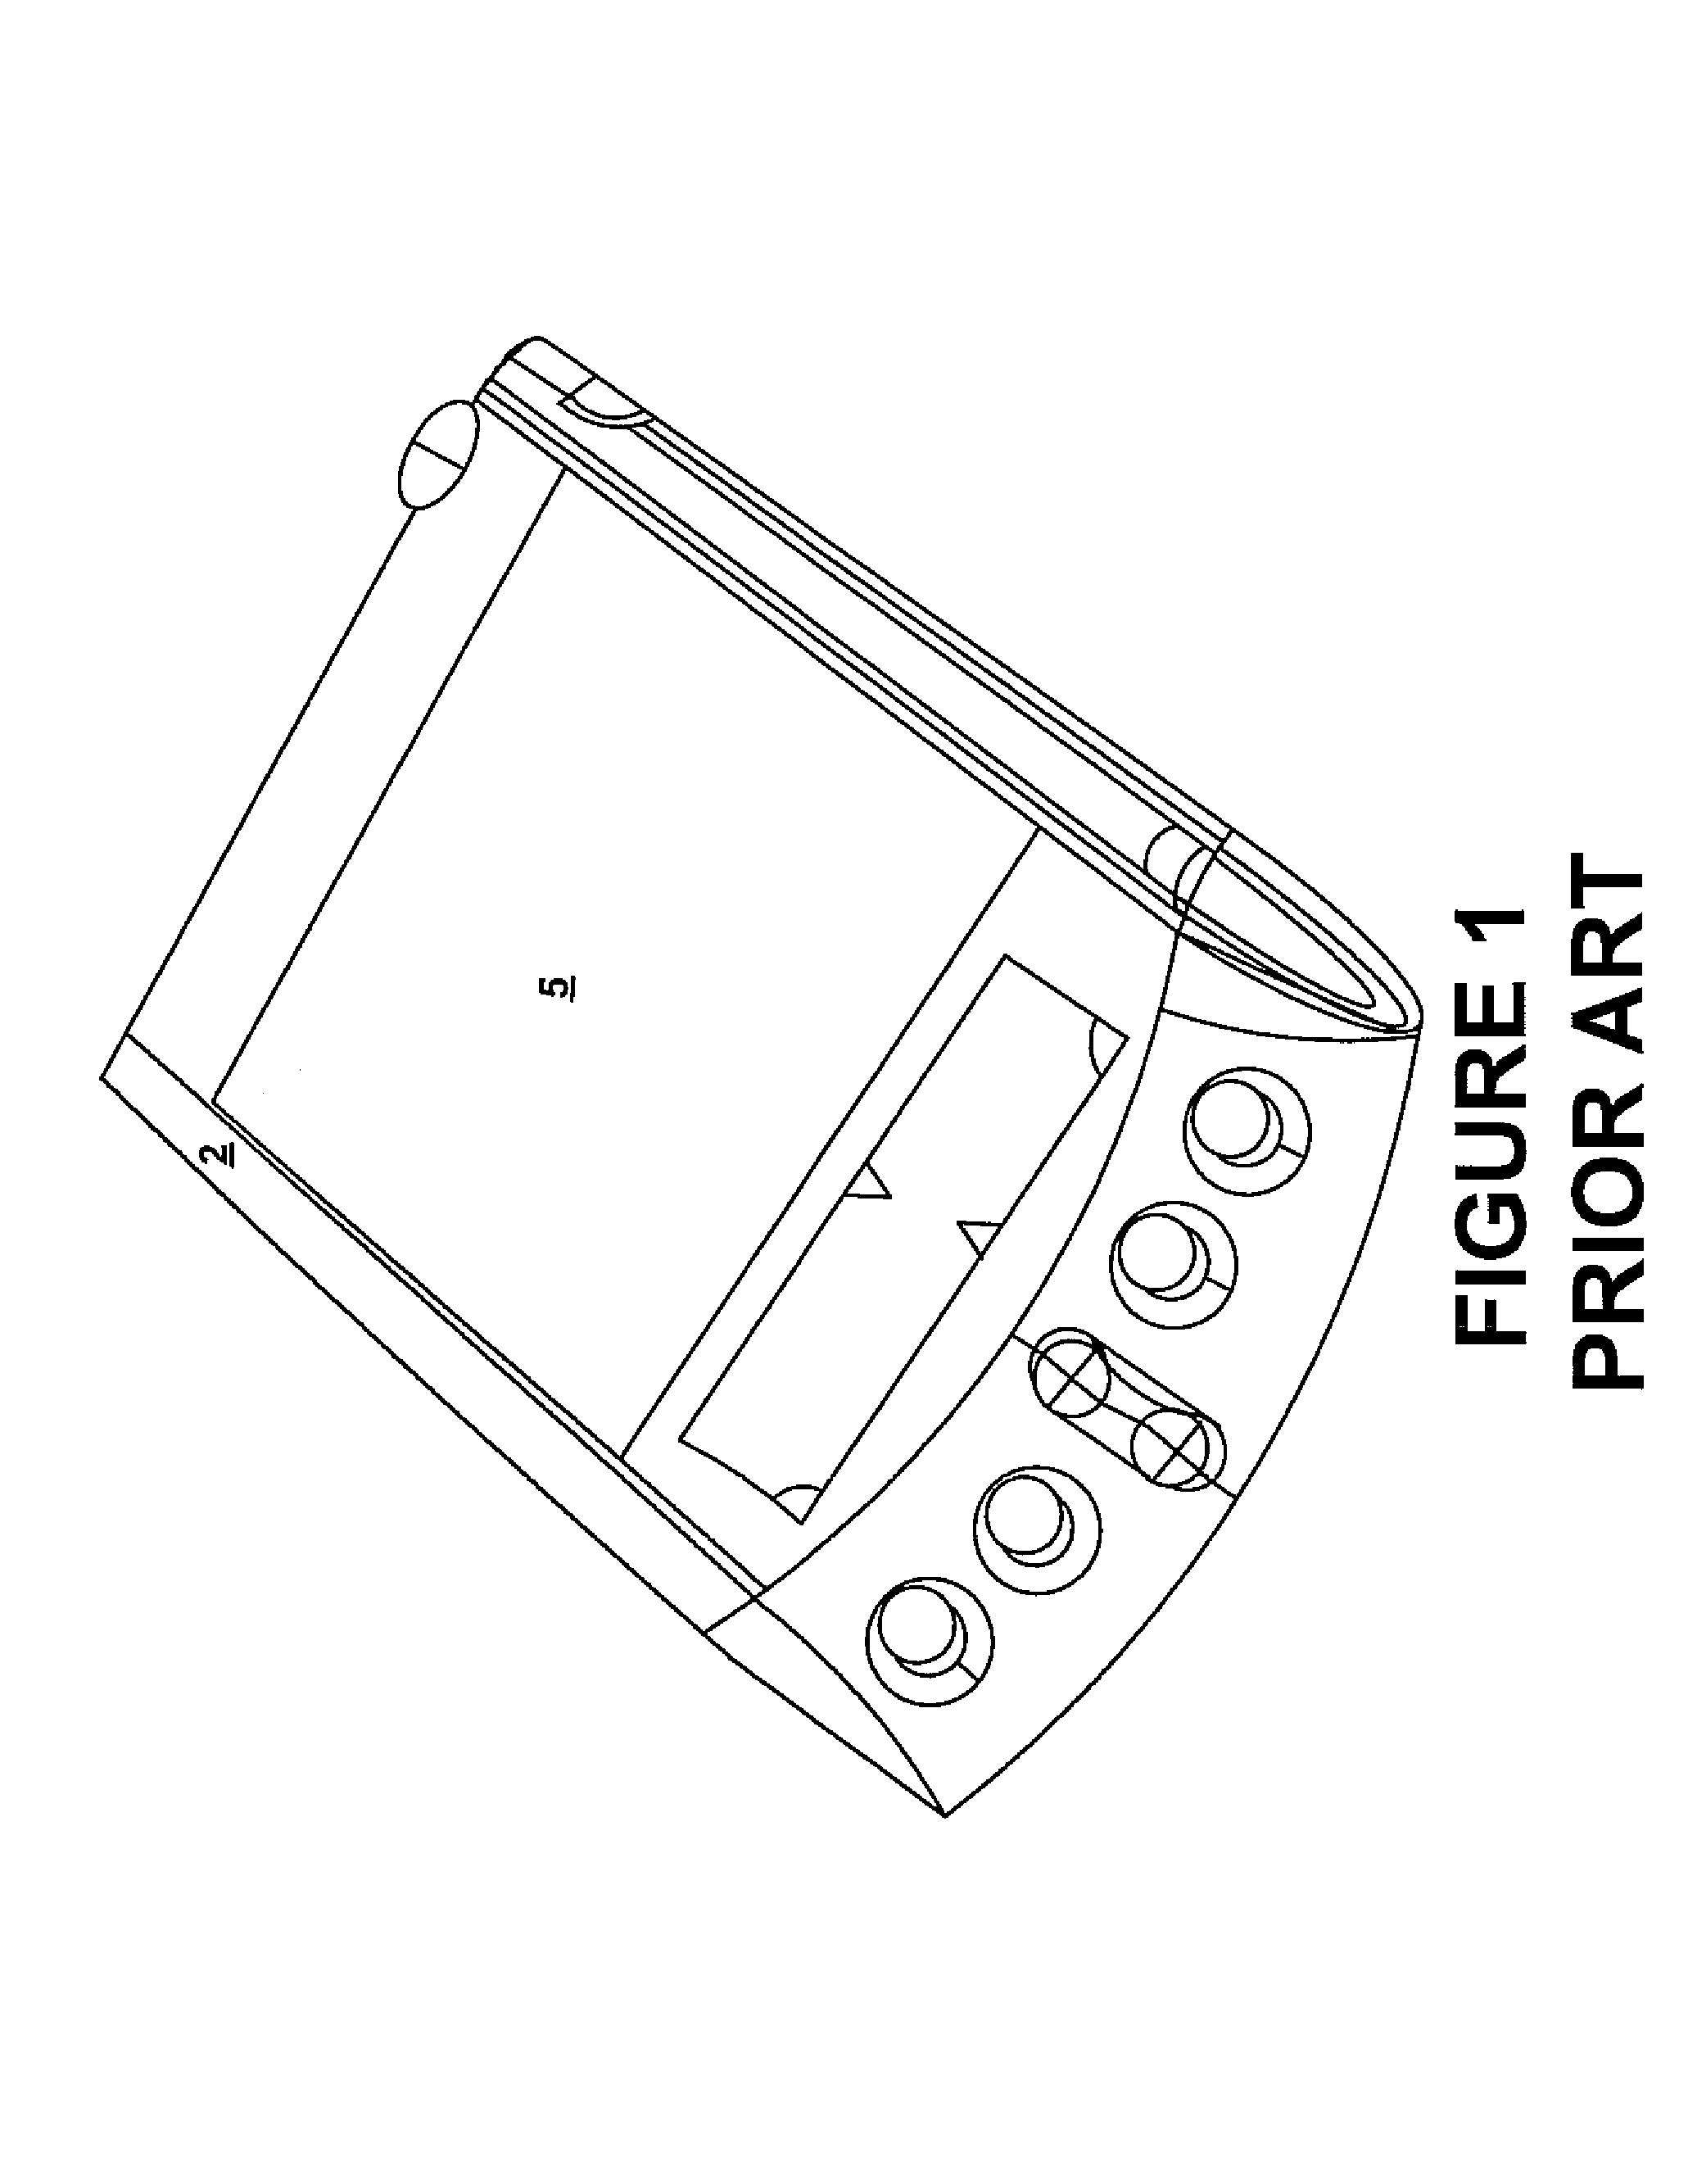 Successively layered modular construction for a portable computer system